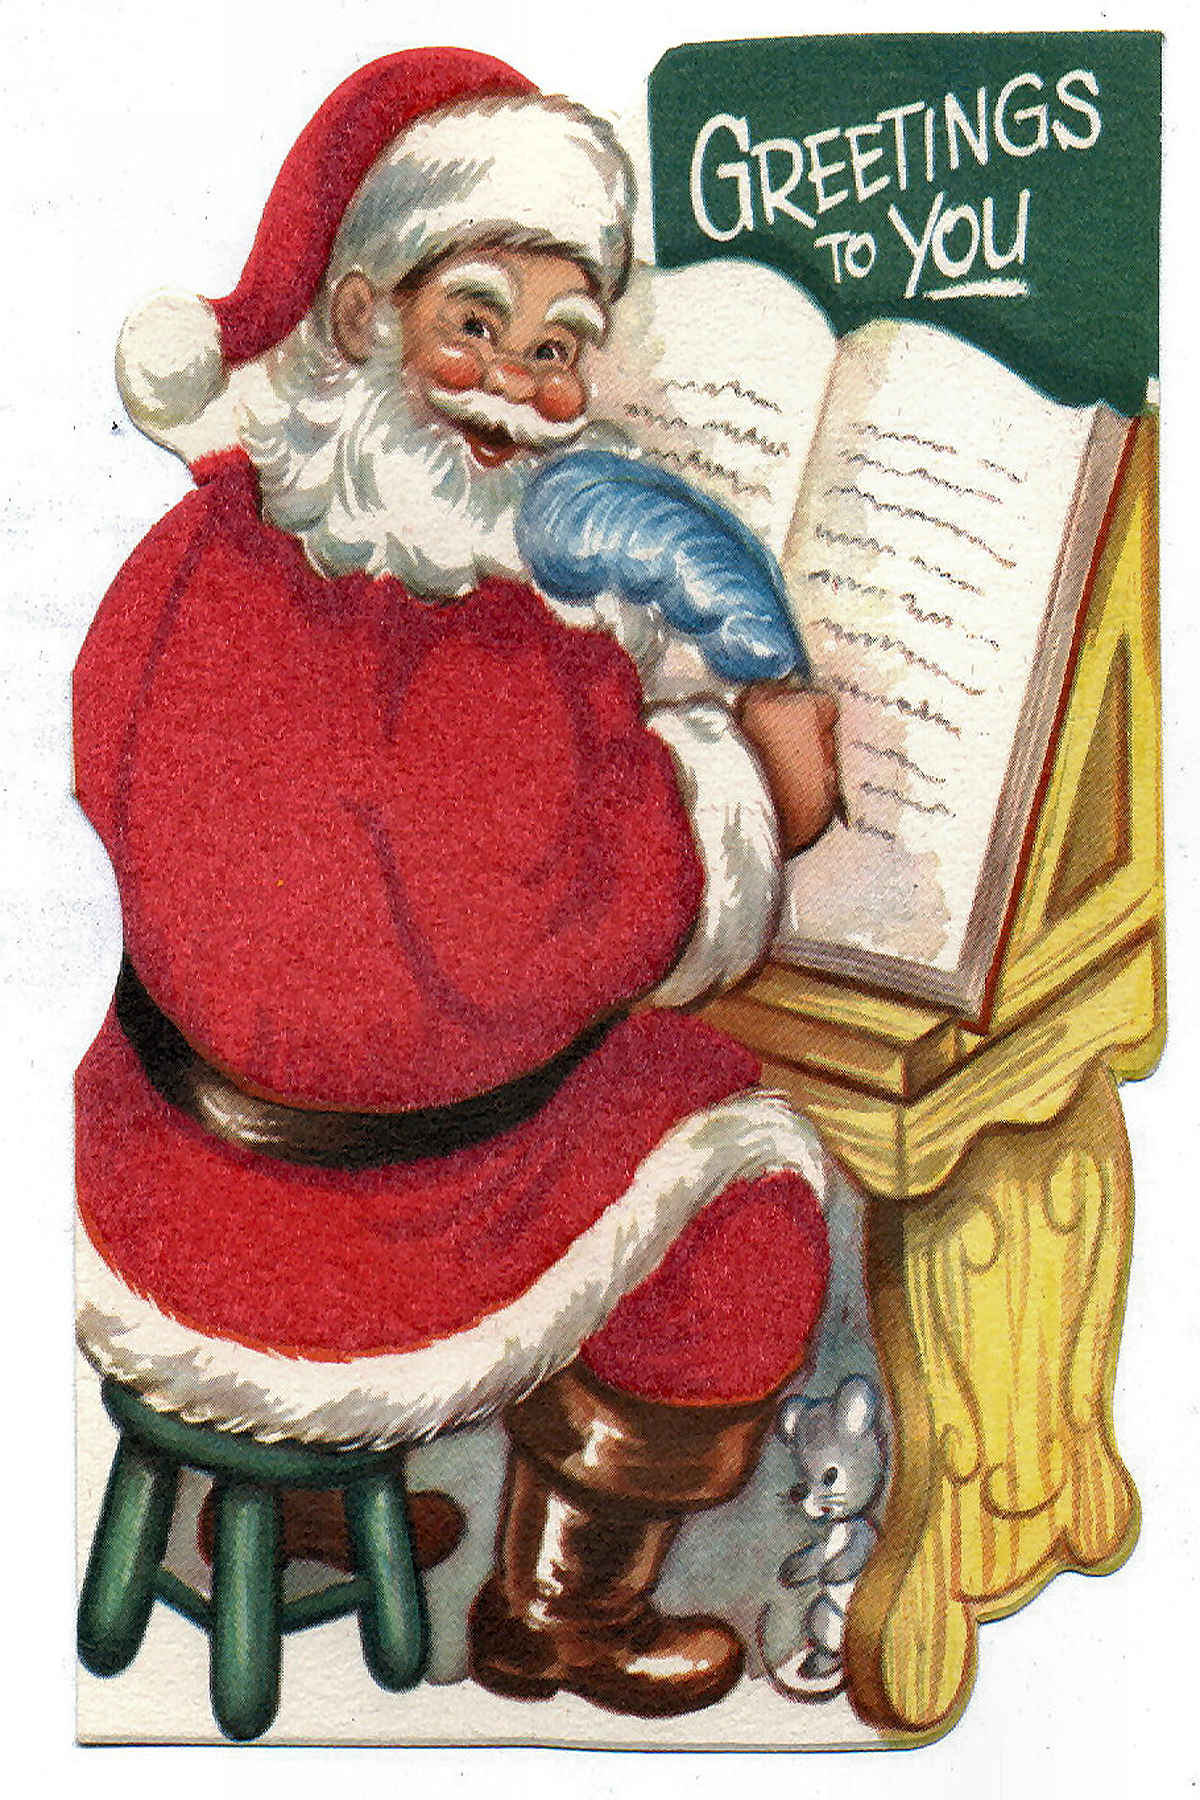 Santa with his list, Greetings to you